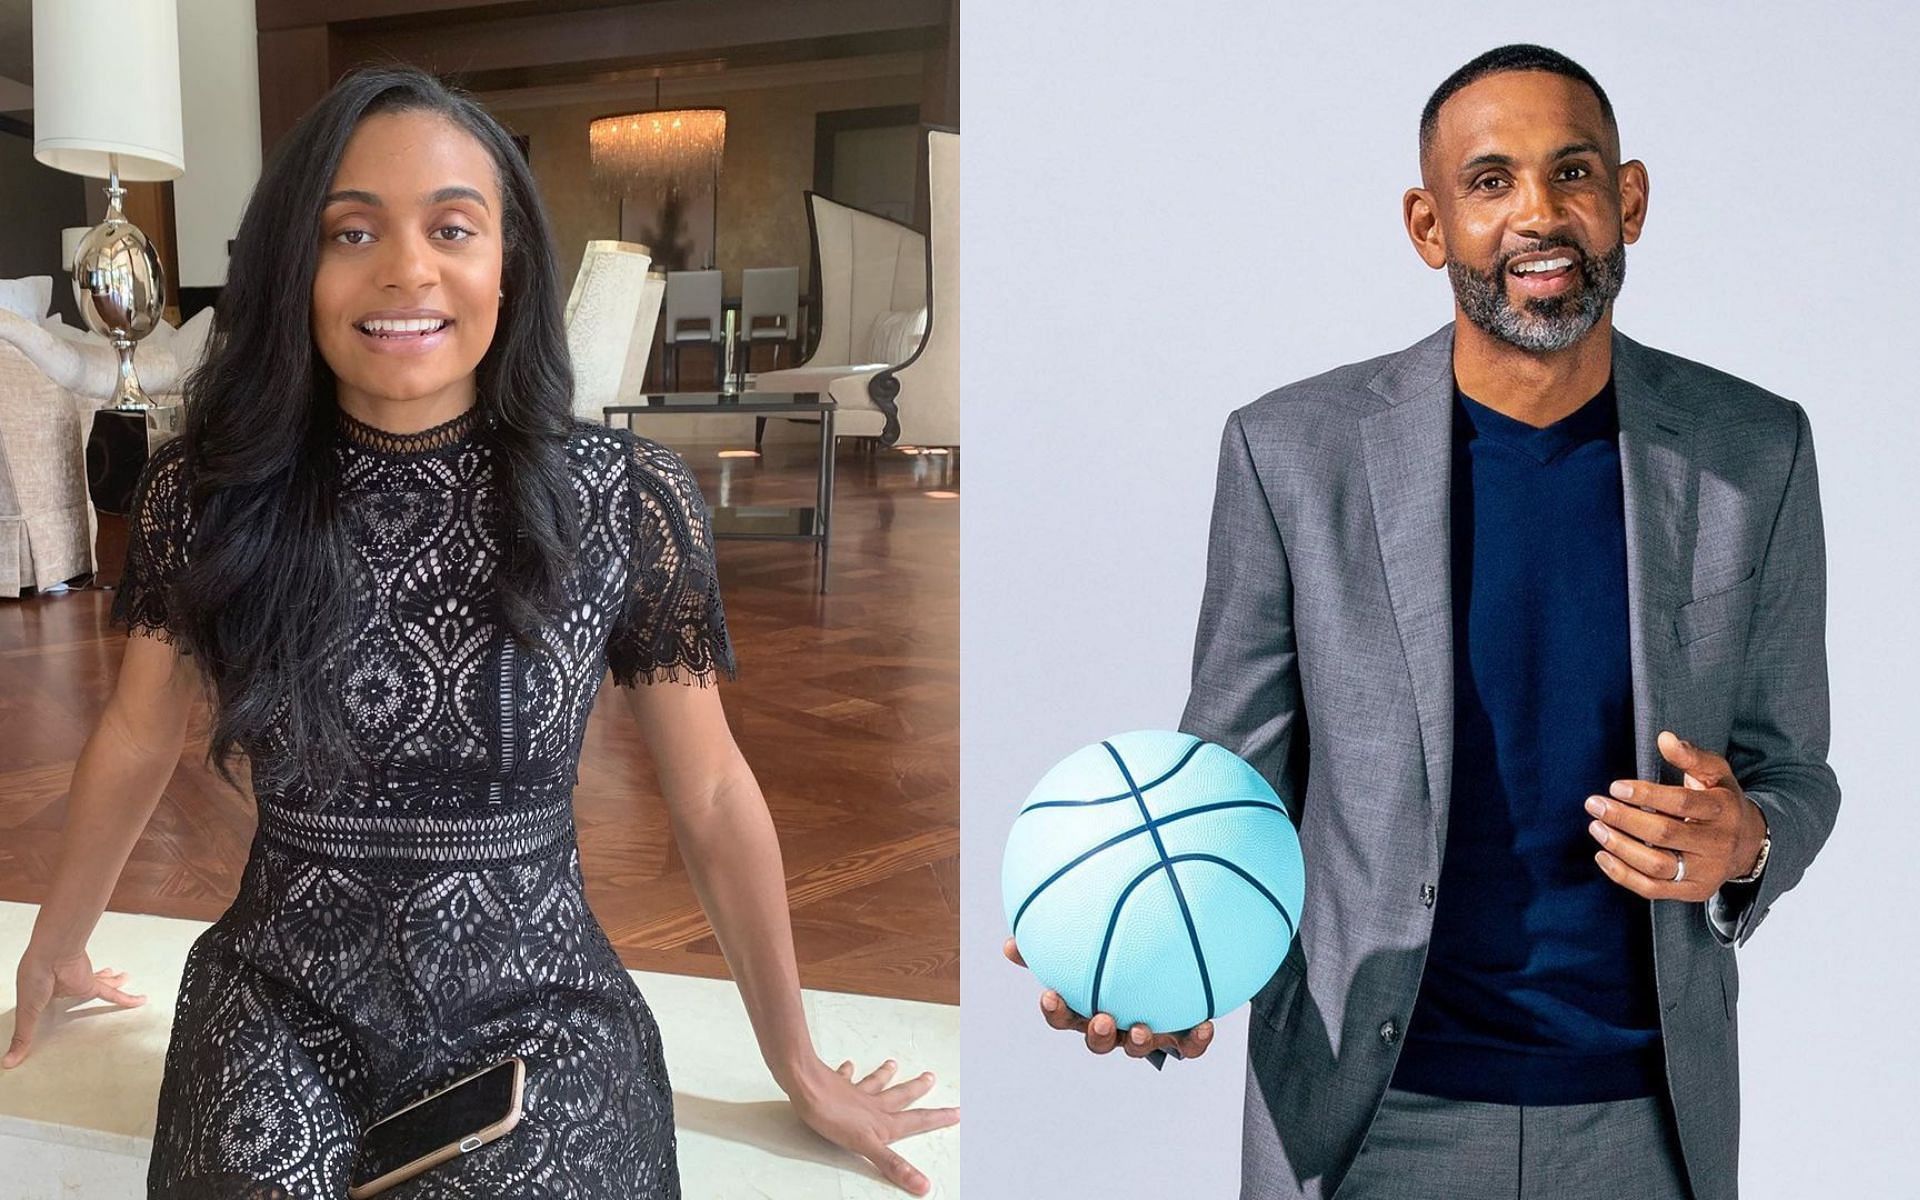 Myla Hill (left) and Grant Hill (right) [Images courtesy @mylahill and @realgranthill on Instagram)